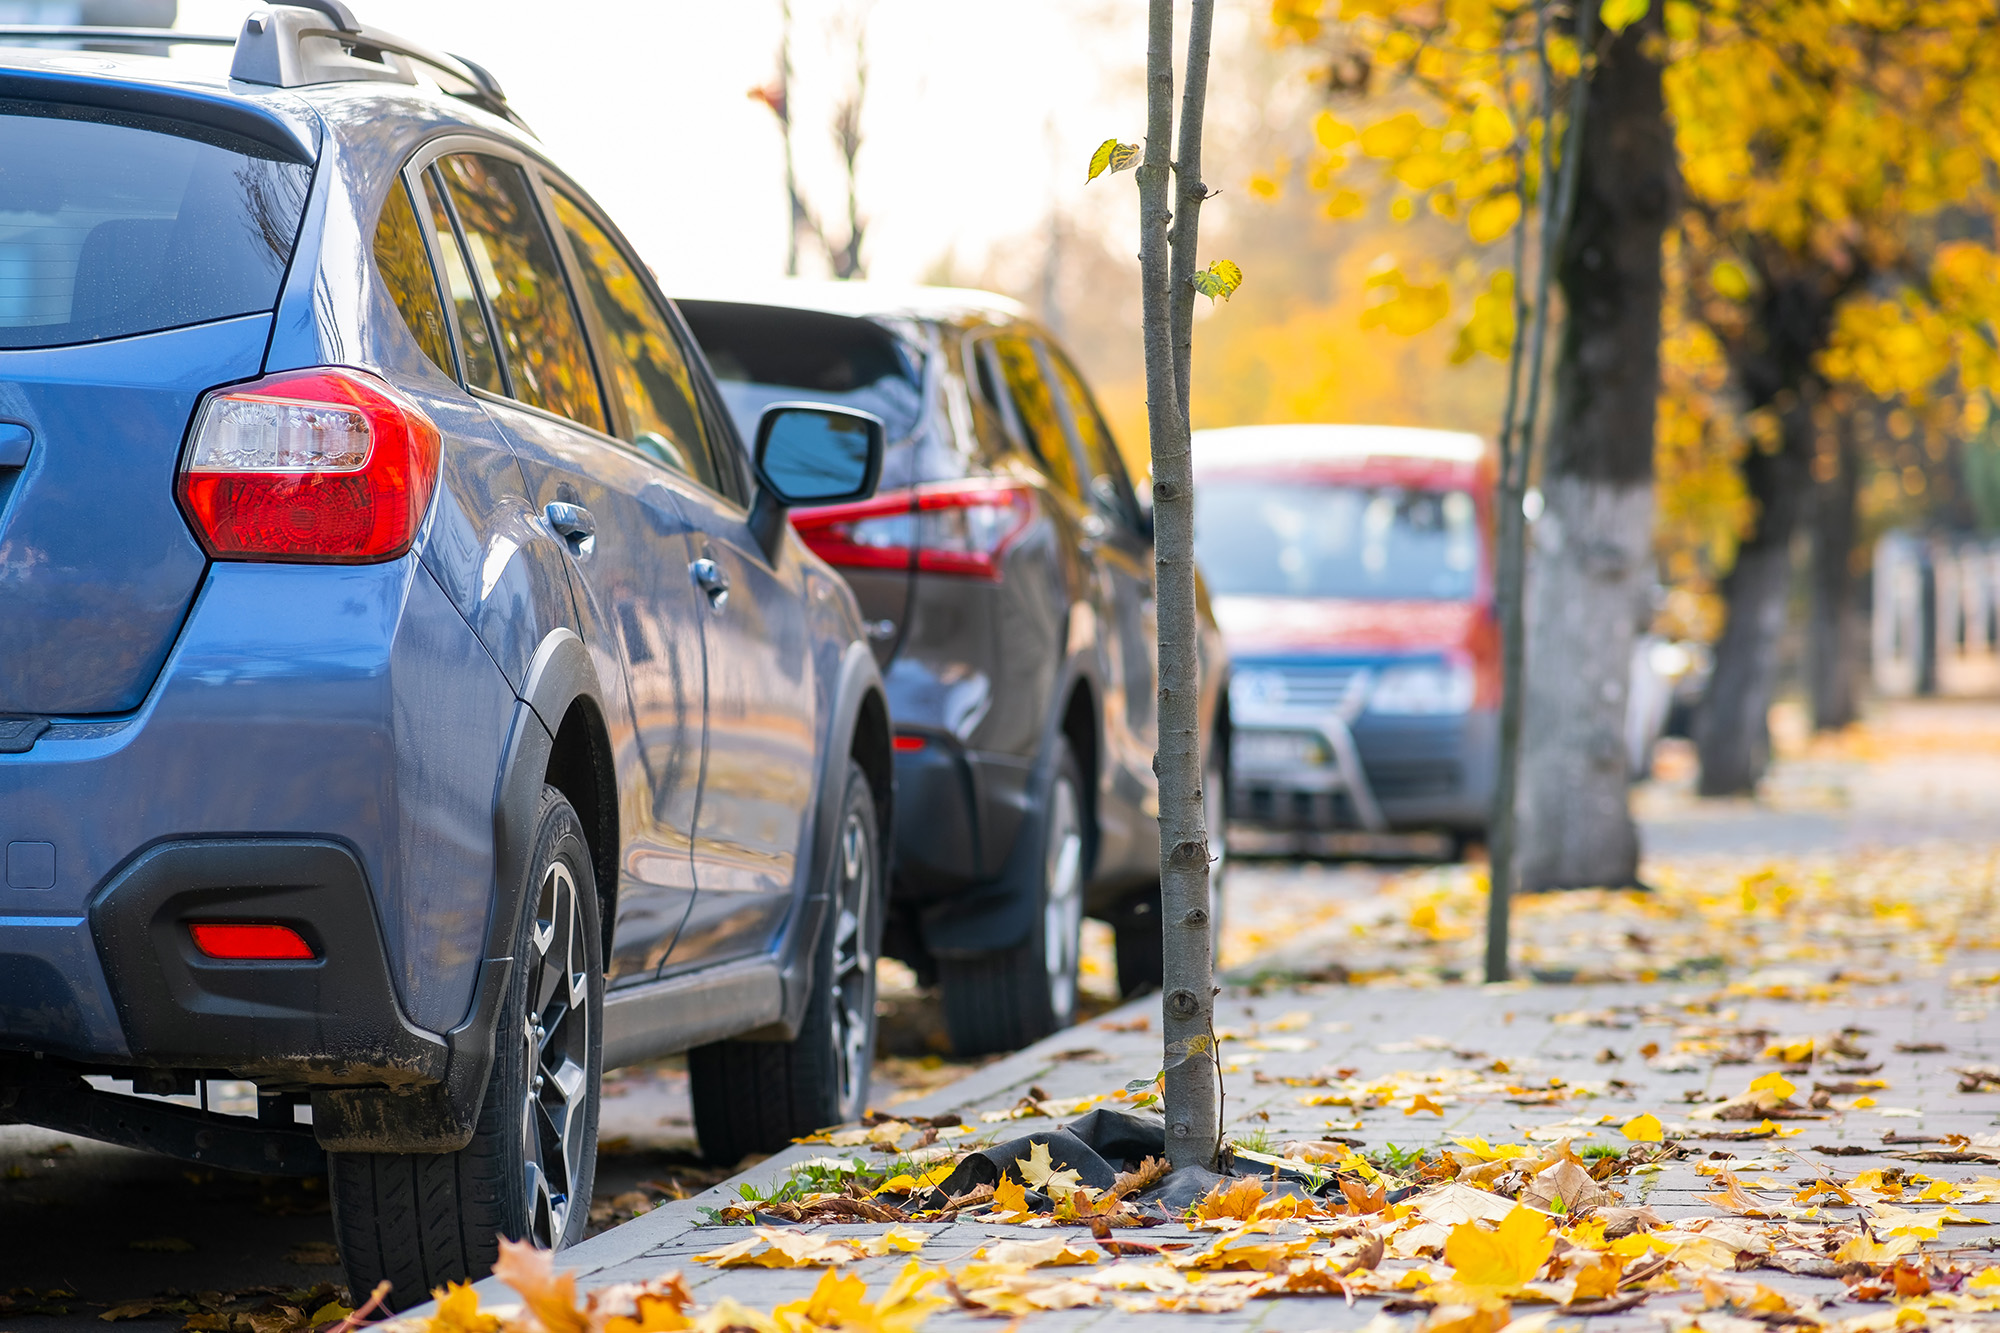 A photo of cars parked on a street in autumn.